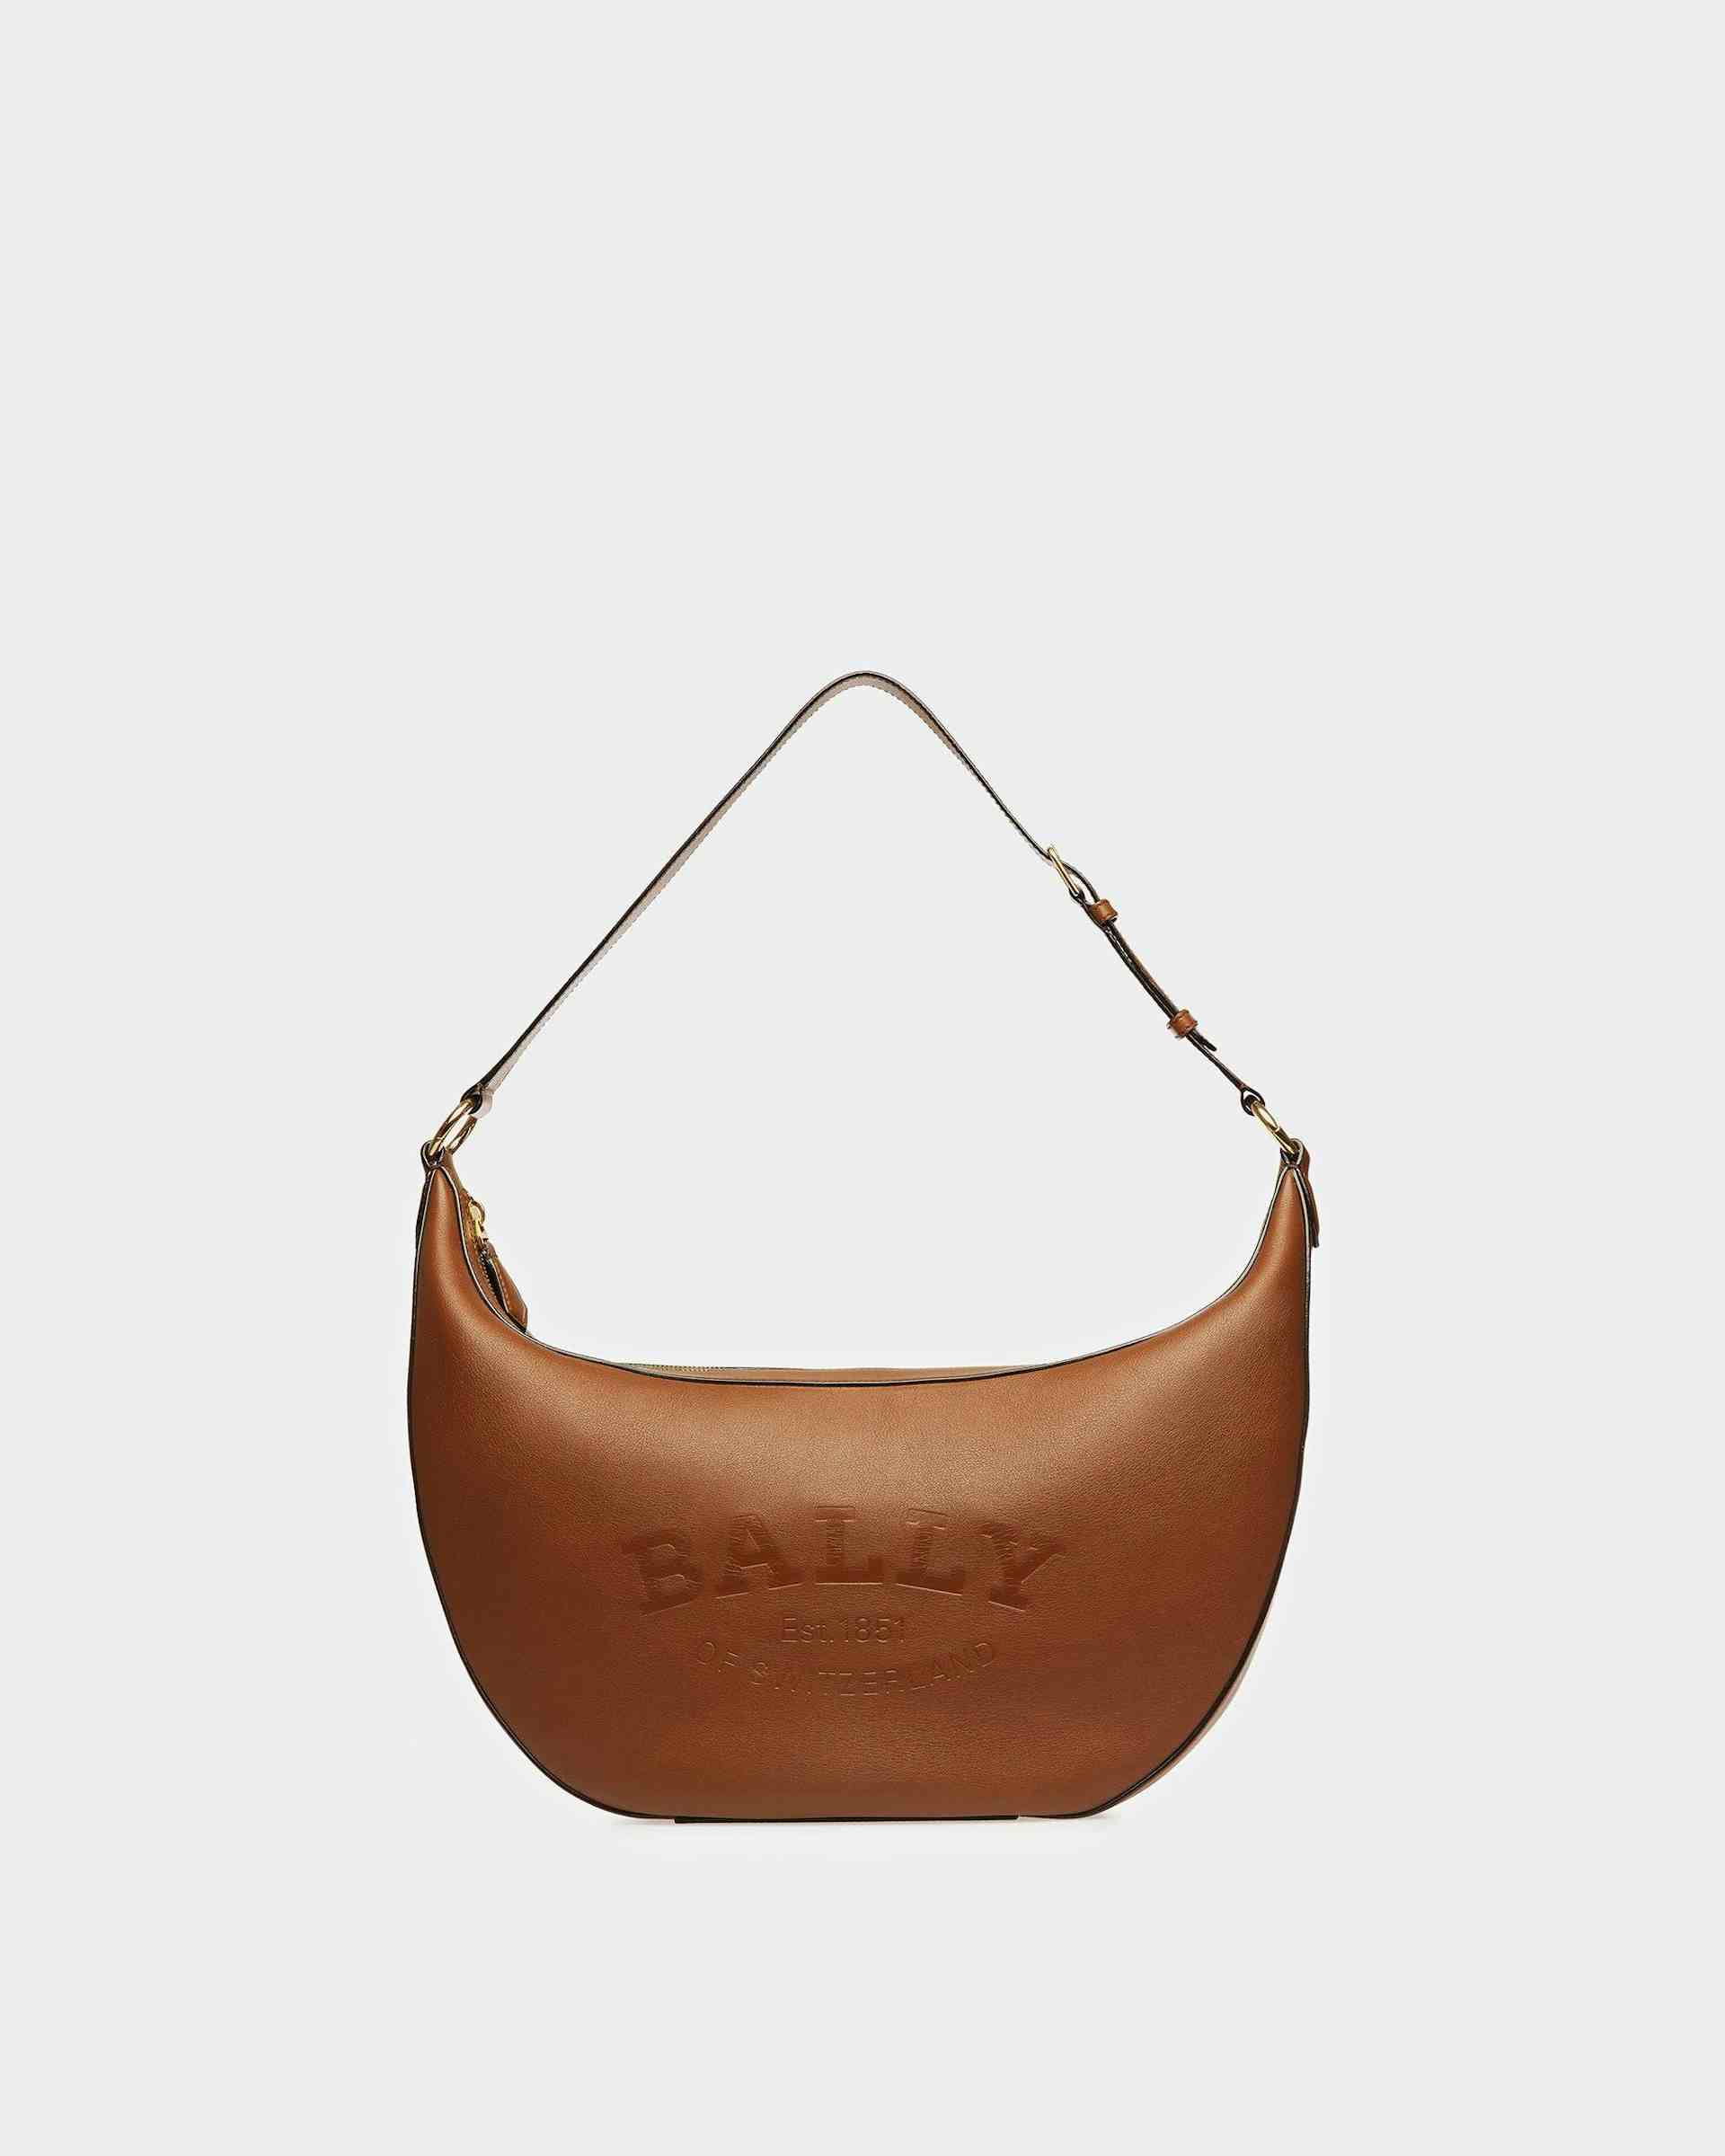 Charo Leather Shoulder Bag In Brown - Women's - Bally